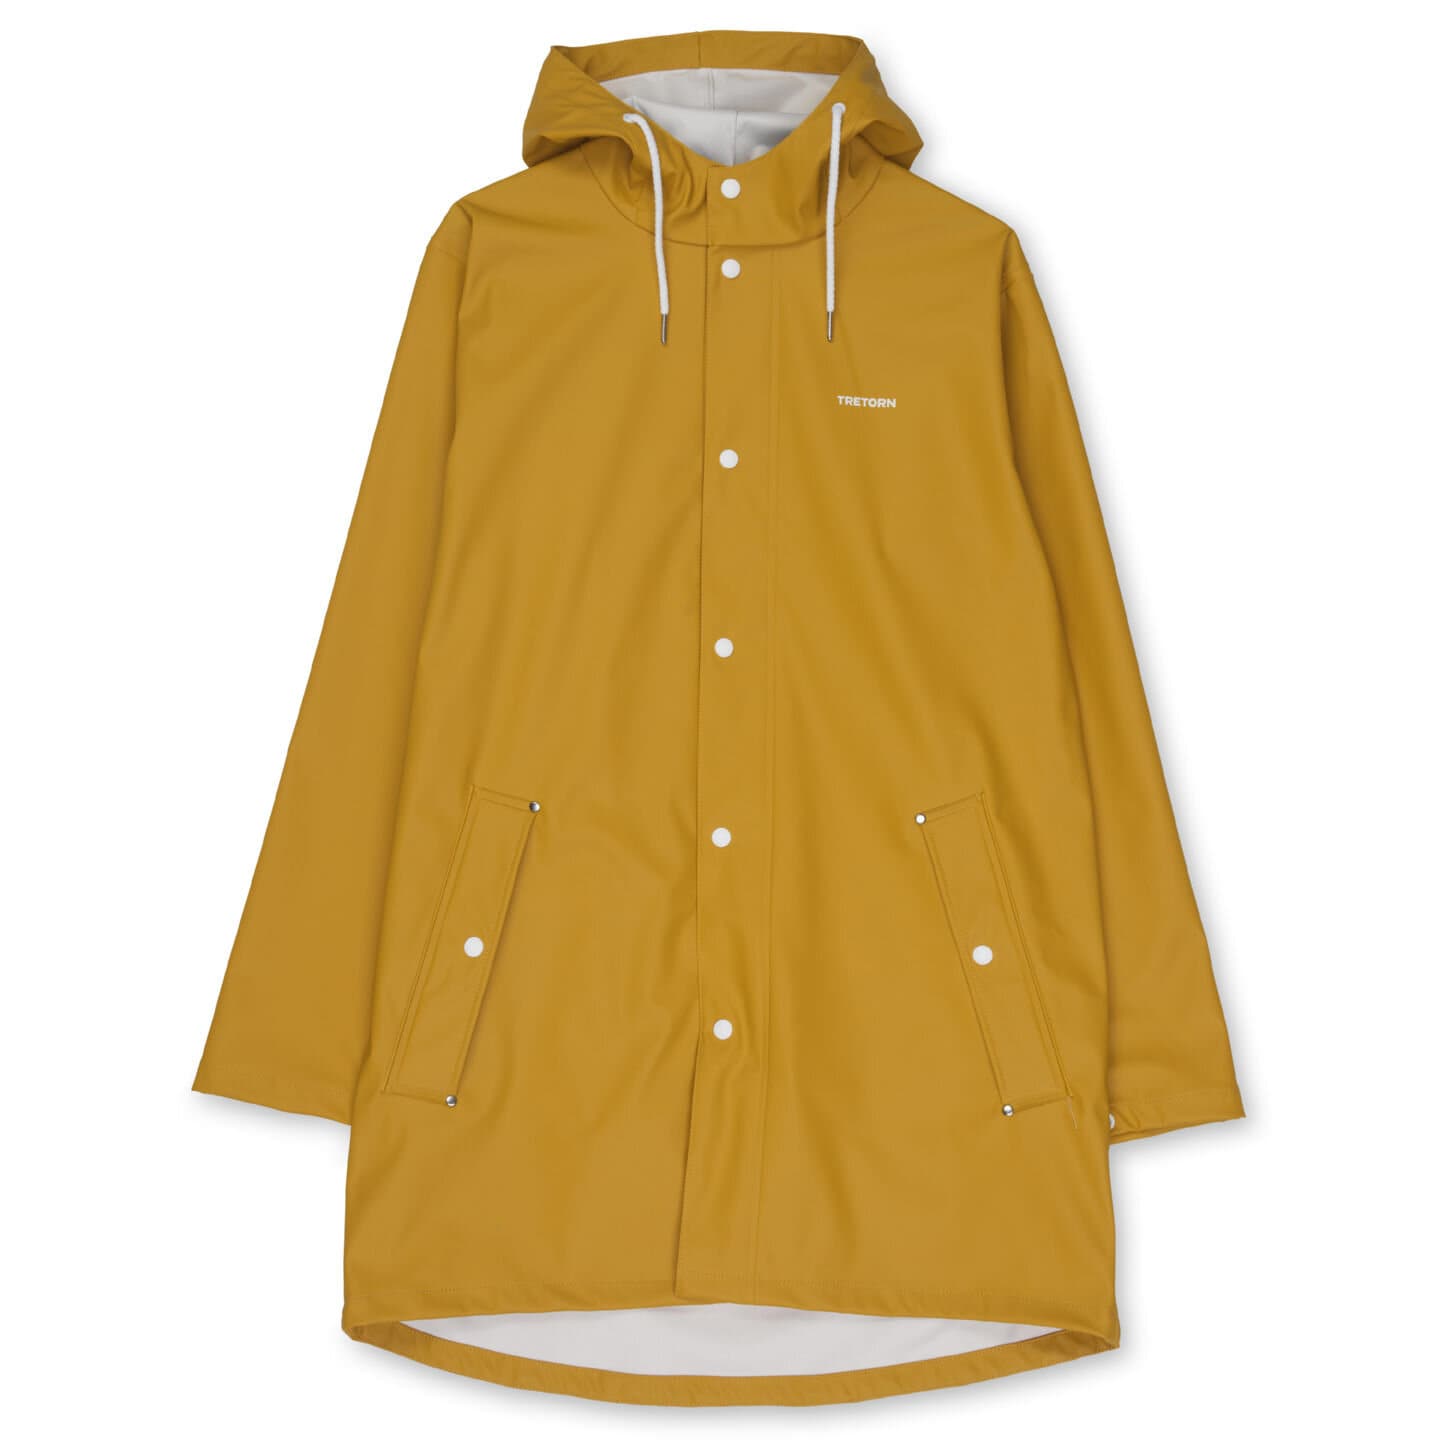 Wings rain jacket by Tretorn for men and women in the colour dark yellow